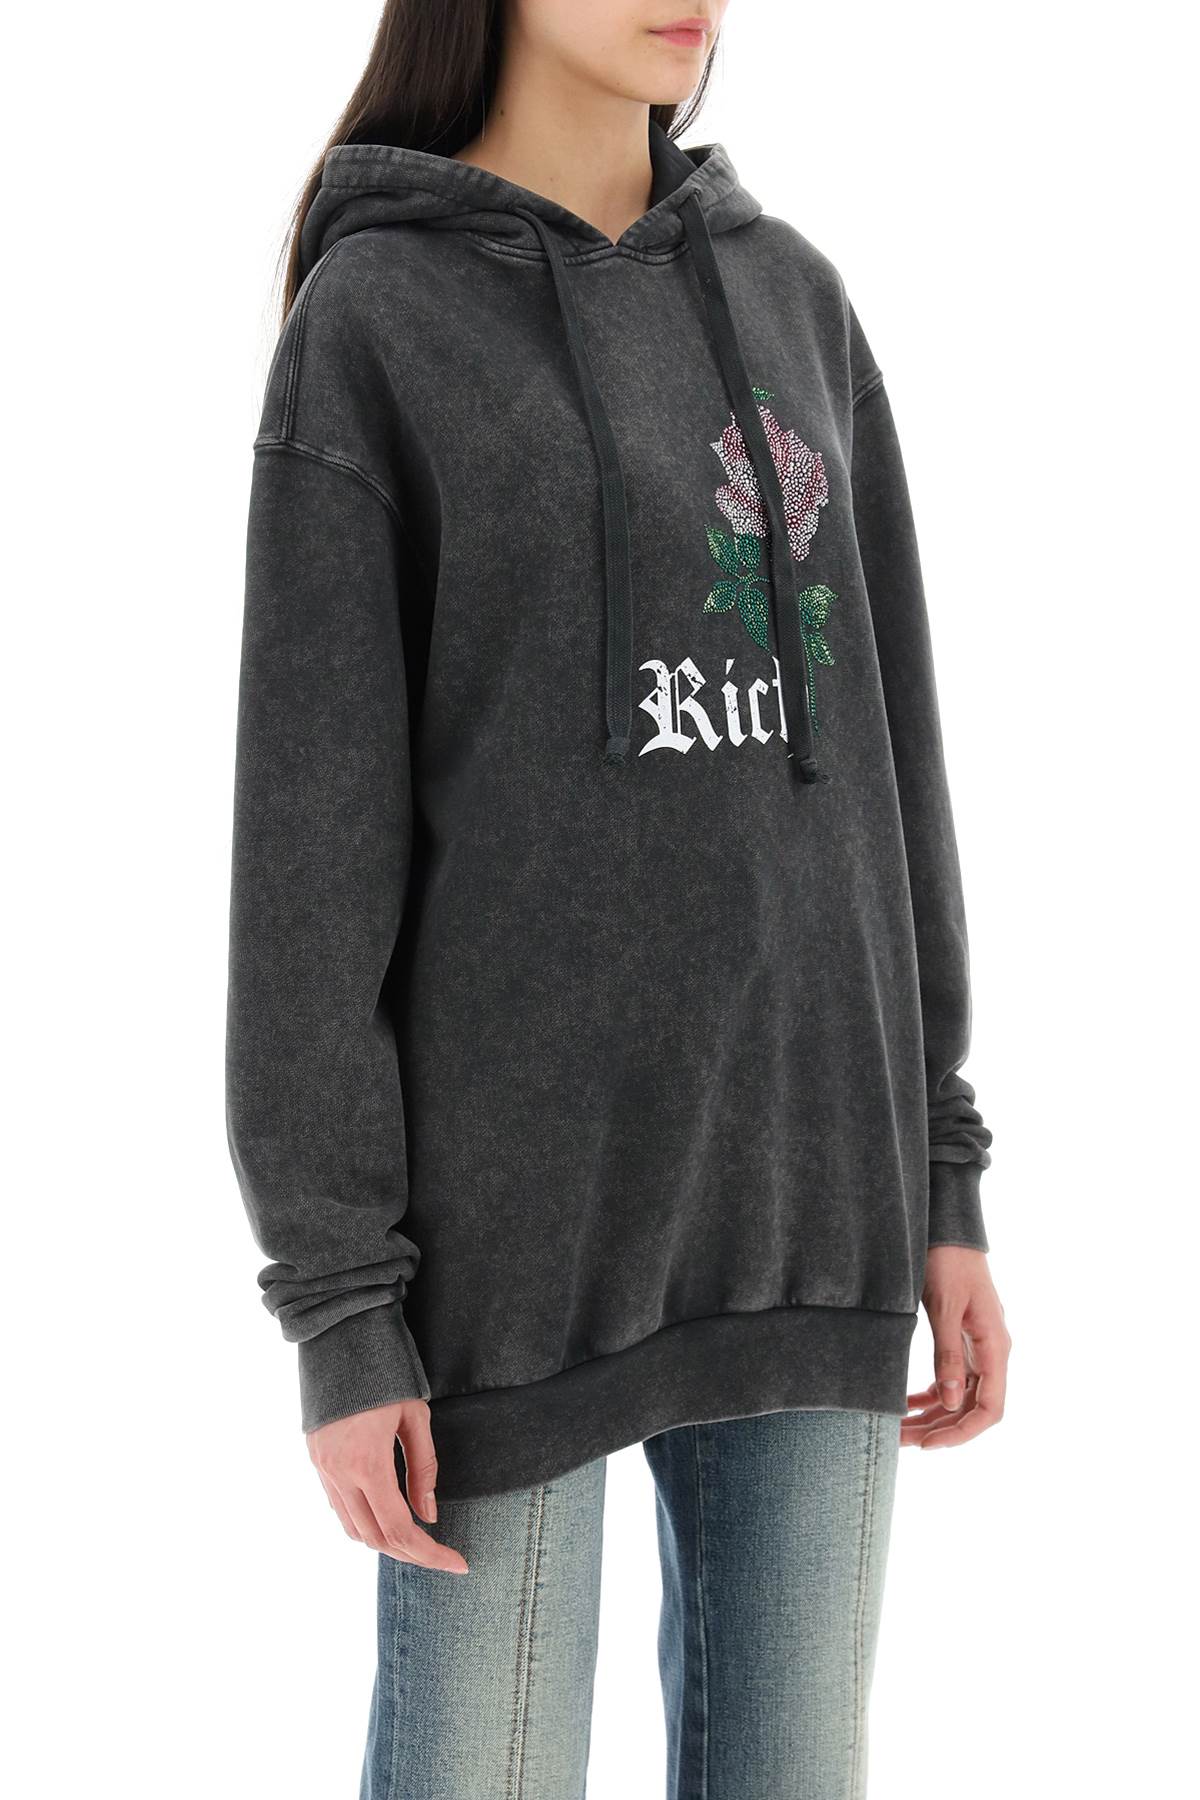 Alessandra rich let's kiss hoodie-1